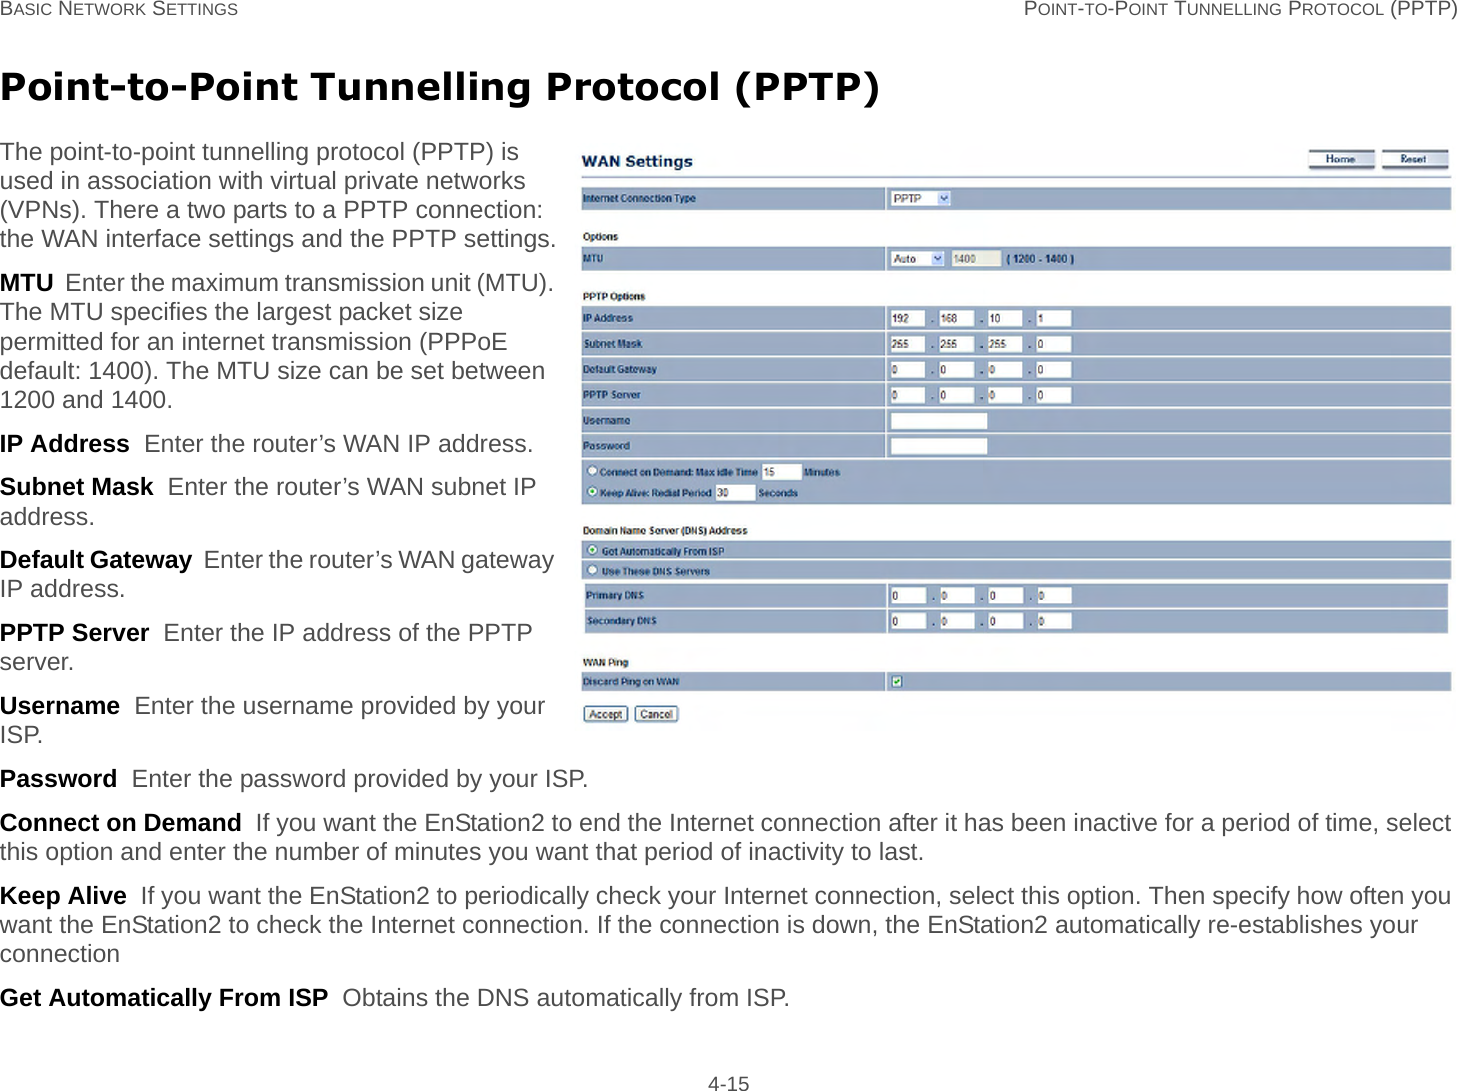 BASIC NETWORK SETTINGS POINT-TO-POINT TUNNELLING PROTOCOL (PPTP) 4-15Point-to-Point Tunnelling Protocol (PPTP)The point-to-point tunnelling protocol (PPTP) is used in association with virtual private networks (VPNs). There a two parts to a PPTP connection: the WAN interface settings and the PPTP settings.MTU  Enter the maximum transmission unit (MTU). The MTU specifies the largest packet size permitted for an internet transmission (PPPoE default: 1400). The MTU size can be set between 1200 and 1400.IP Address  Enter the router’s WAN IP address.Subnet Mask  Enter the router’s WAN subnet IP address.Default Gateway  Enter the router’s WAN gateway IP address.PPTP Server  Enter the IP address of the PPTP server.Username  Enter the username provided by your ISP.Password  Enter the password provided by your ISP.Connect on Demand  If you want the EnStation2 to end the Internet connection after it has been inactive for a period of time, select this option and enter the number of minutes you want that period of inactivity to last.Keep Alive  If you want the EnStation2 to periodically check your Internet connection, select this option. Then specify how often you want the EnStation2 to check the Internet connection. If the connection is down, the EnStation2 automatically re-establishes your connectionGet Automatically From ISP  Obtains the DNS automatically from ISP.